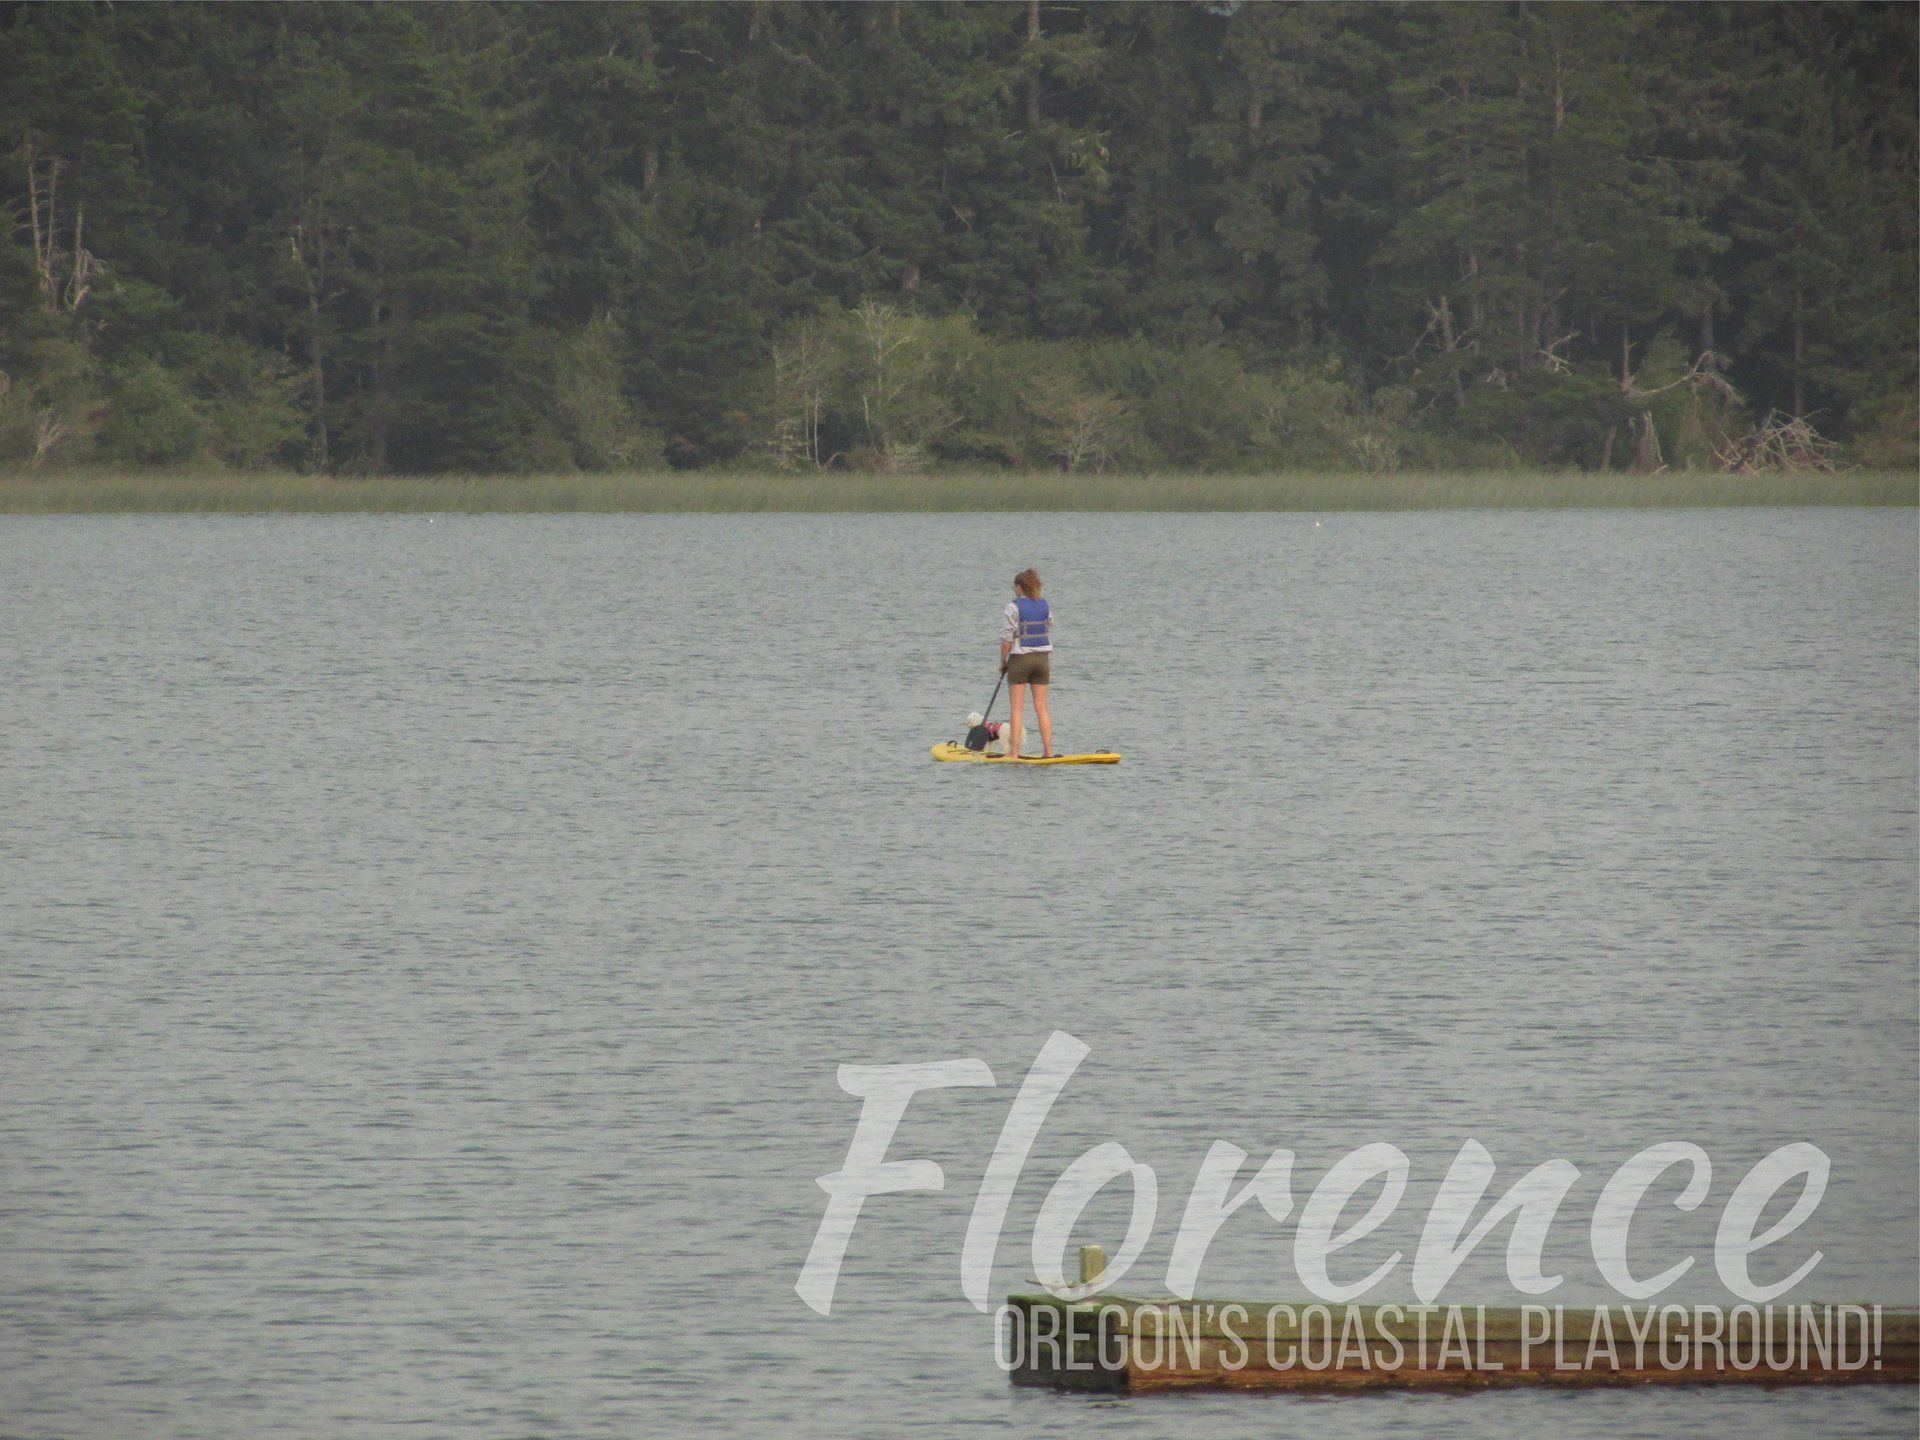 Things to do in Florence, OR